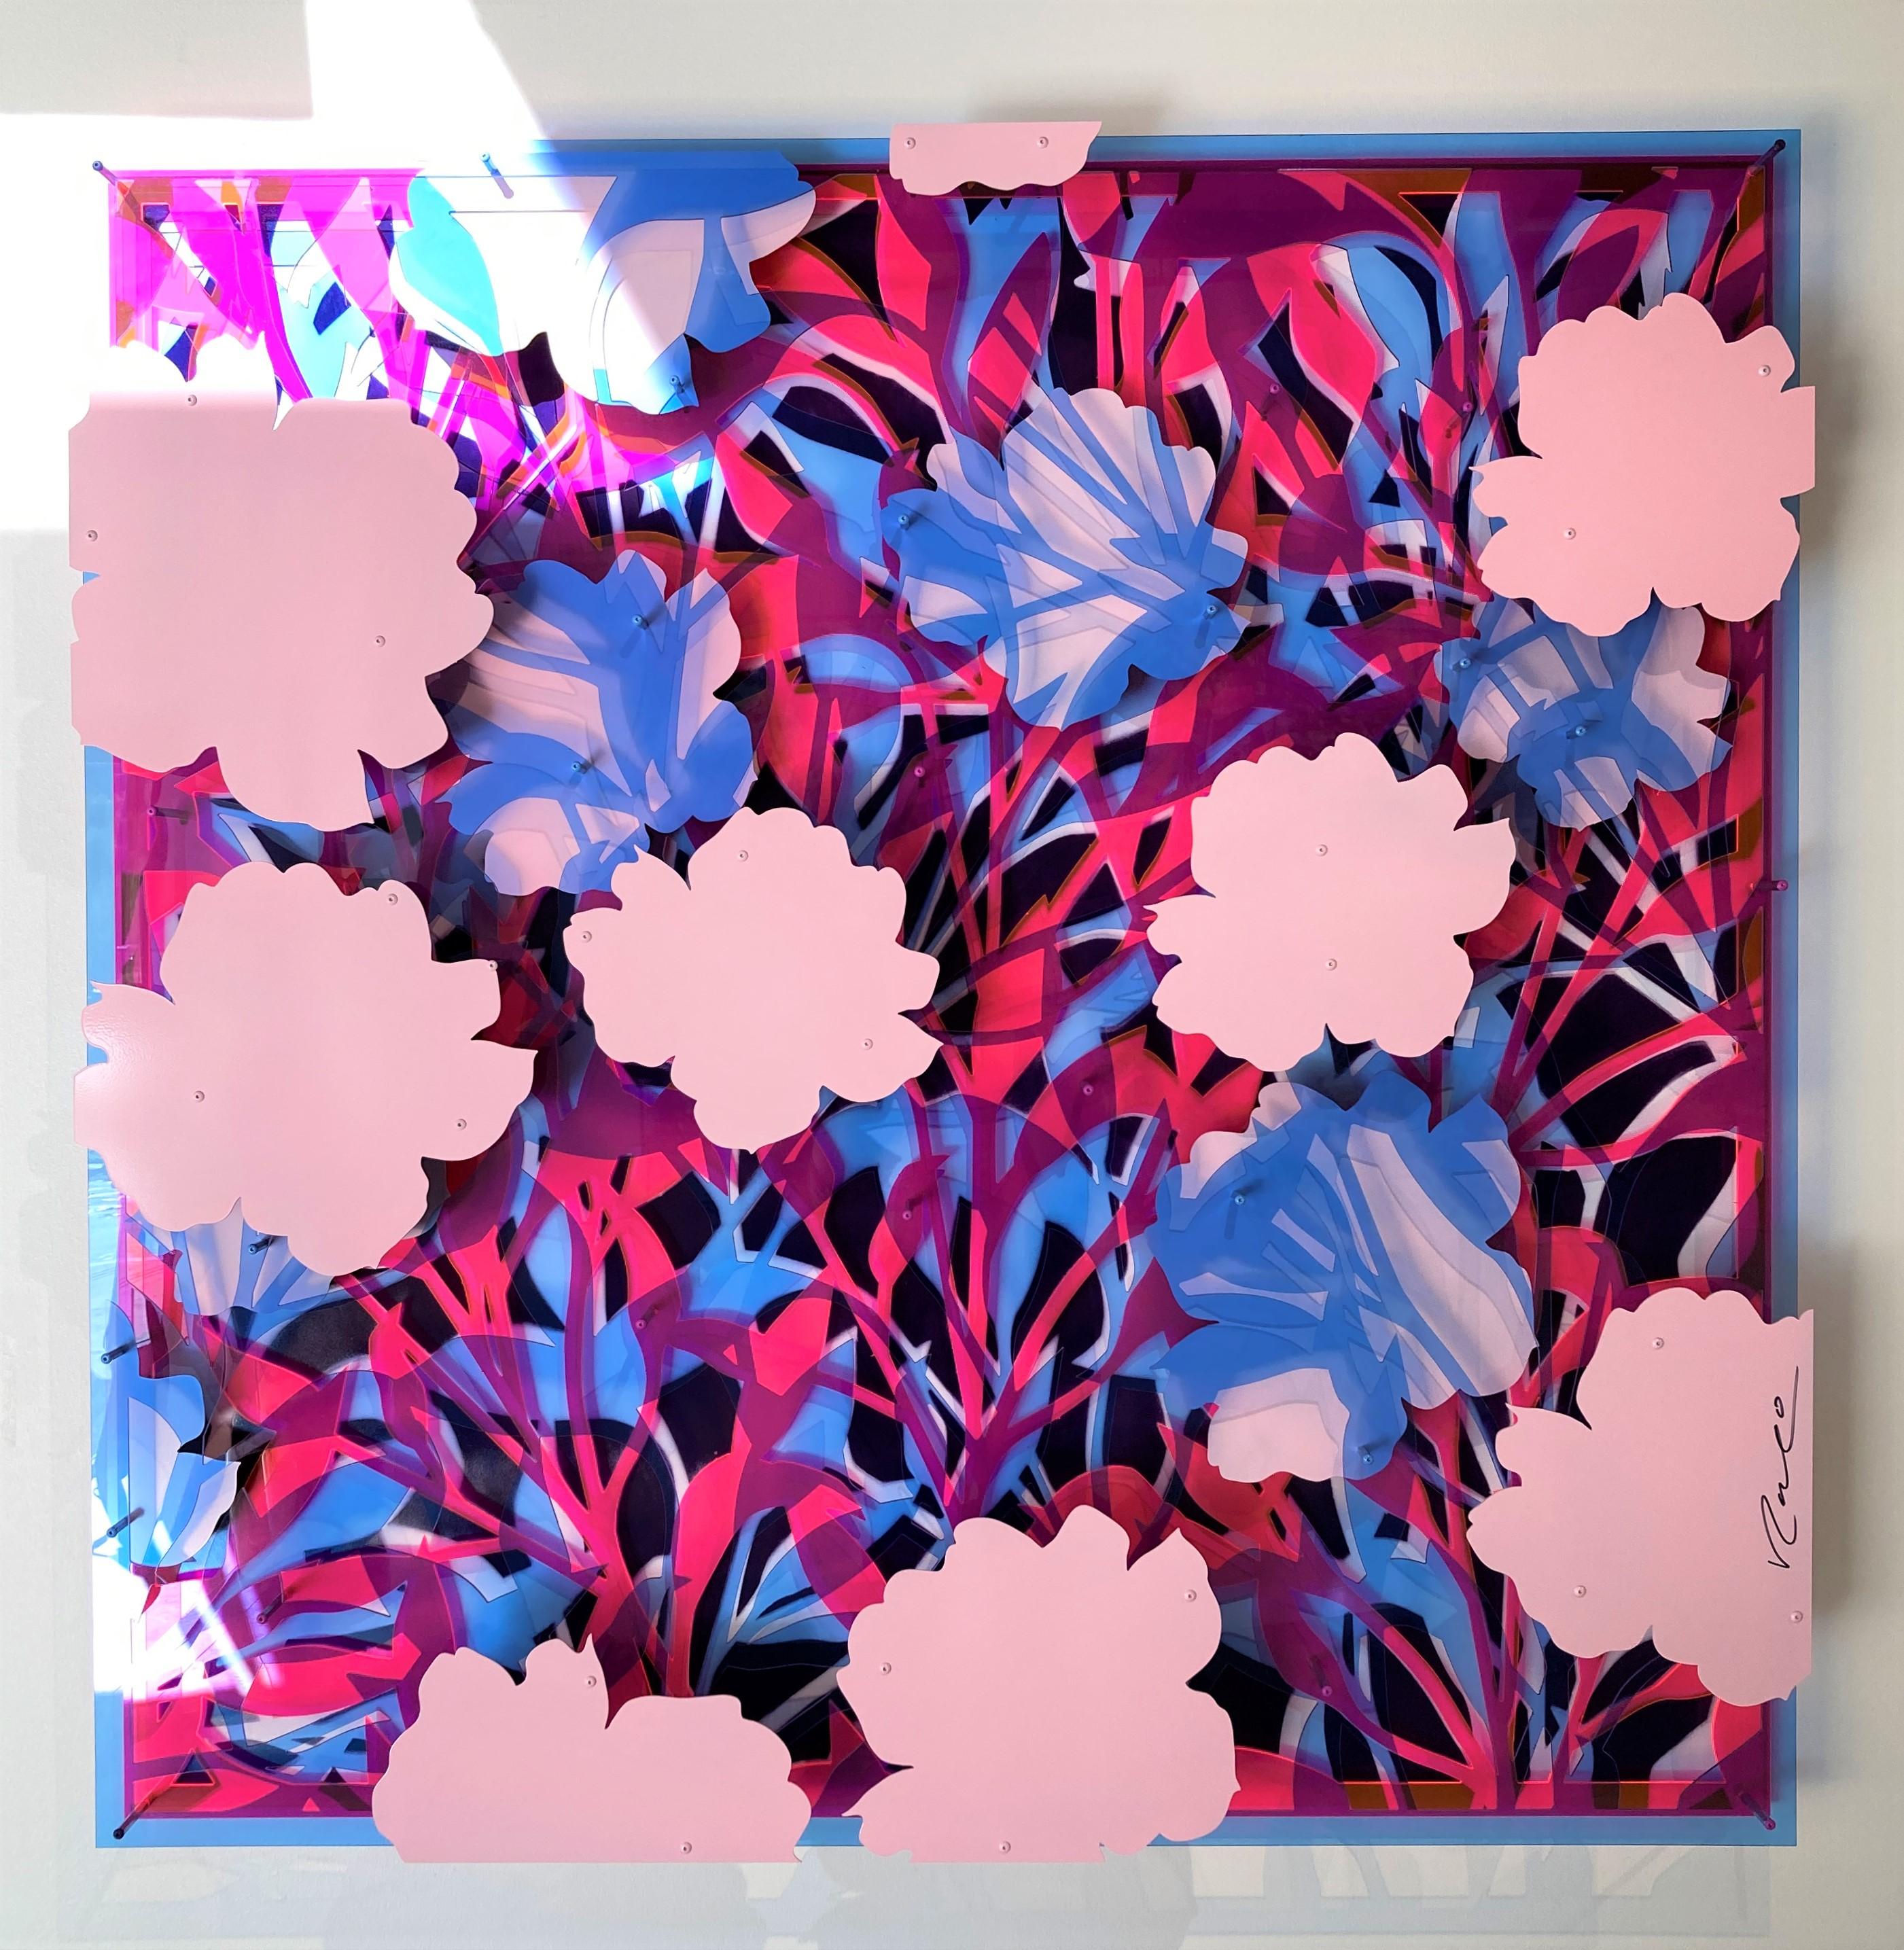 Flowers - Blue and Neon Pink - Painting by Michael Kalish